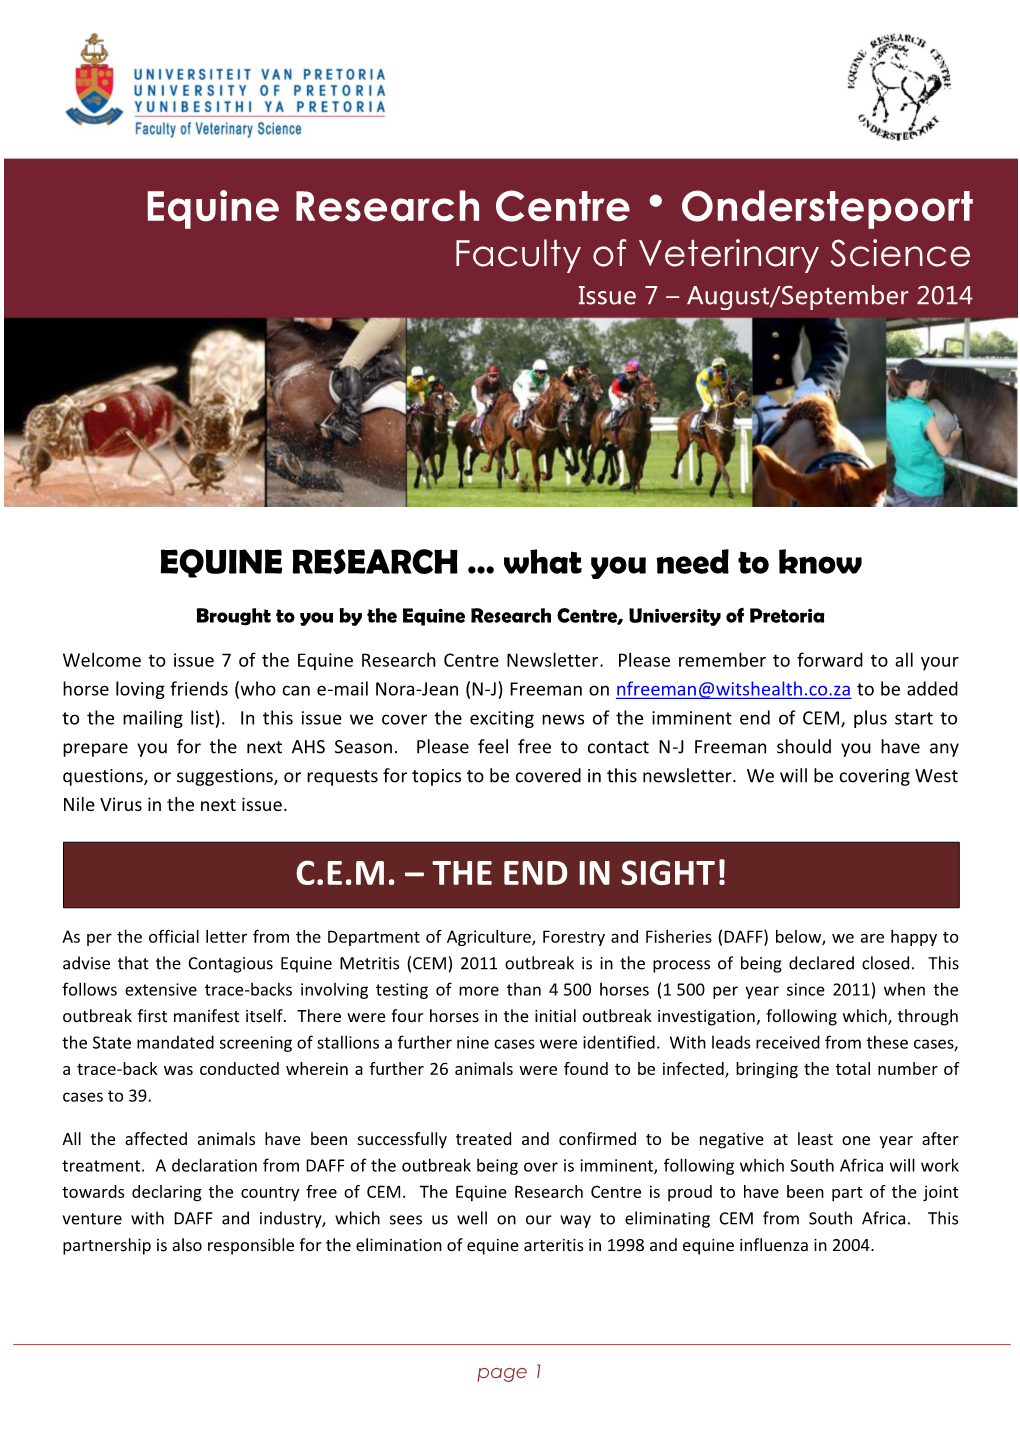 Equine Research Centre • Onderstepoort Faculty of Veterinary Science Issue 7 – August/September 2014 9999